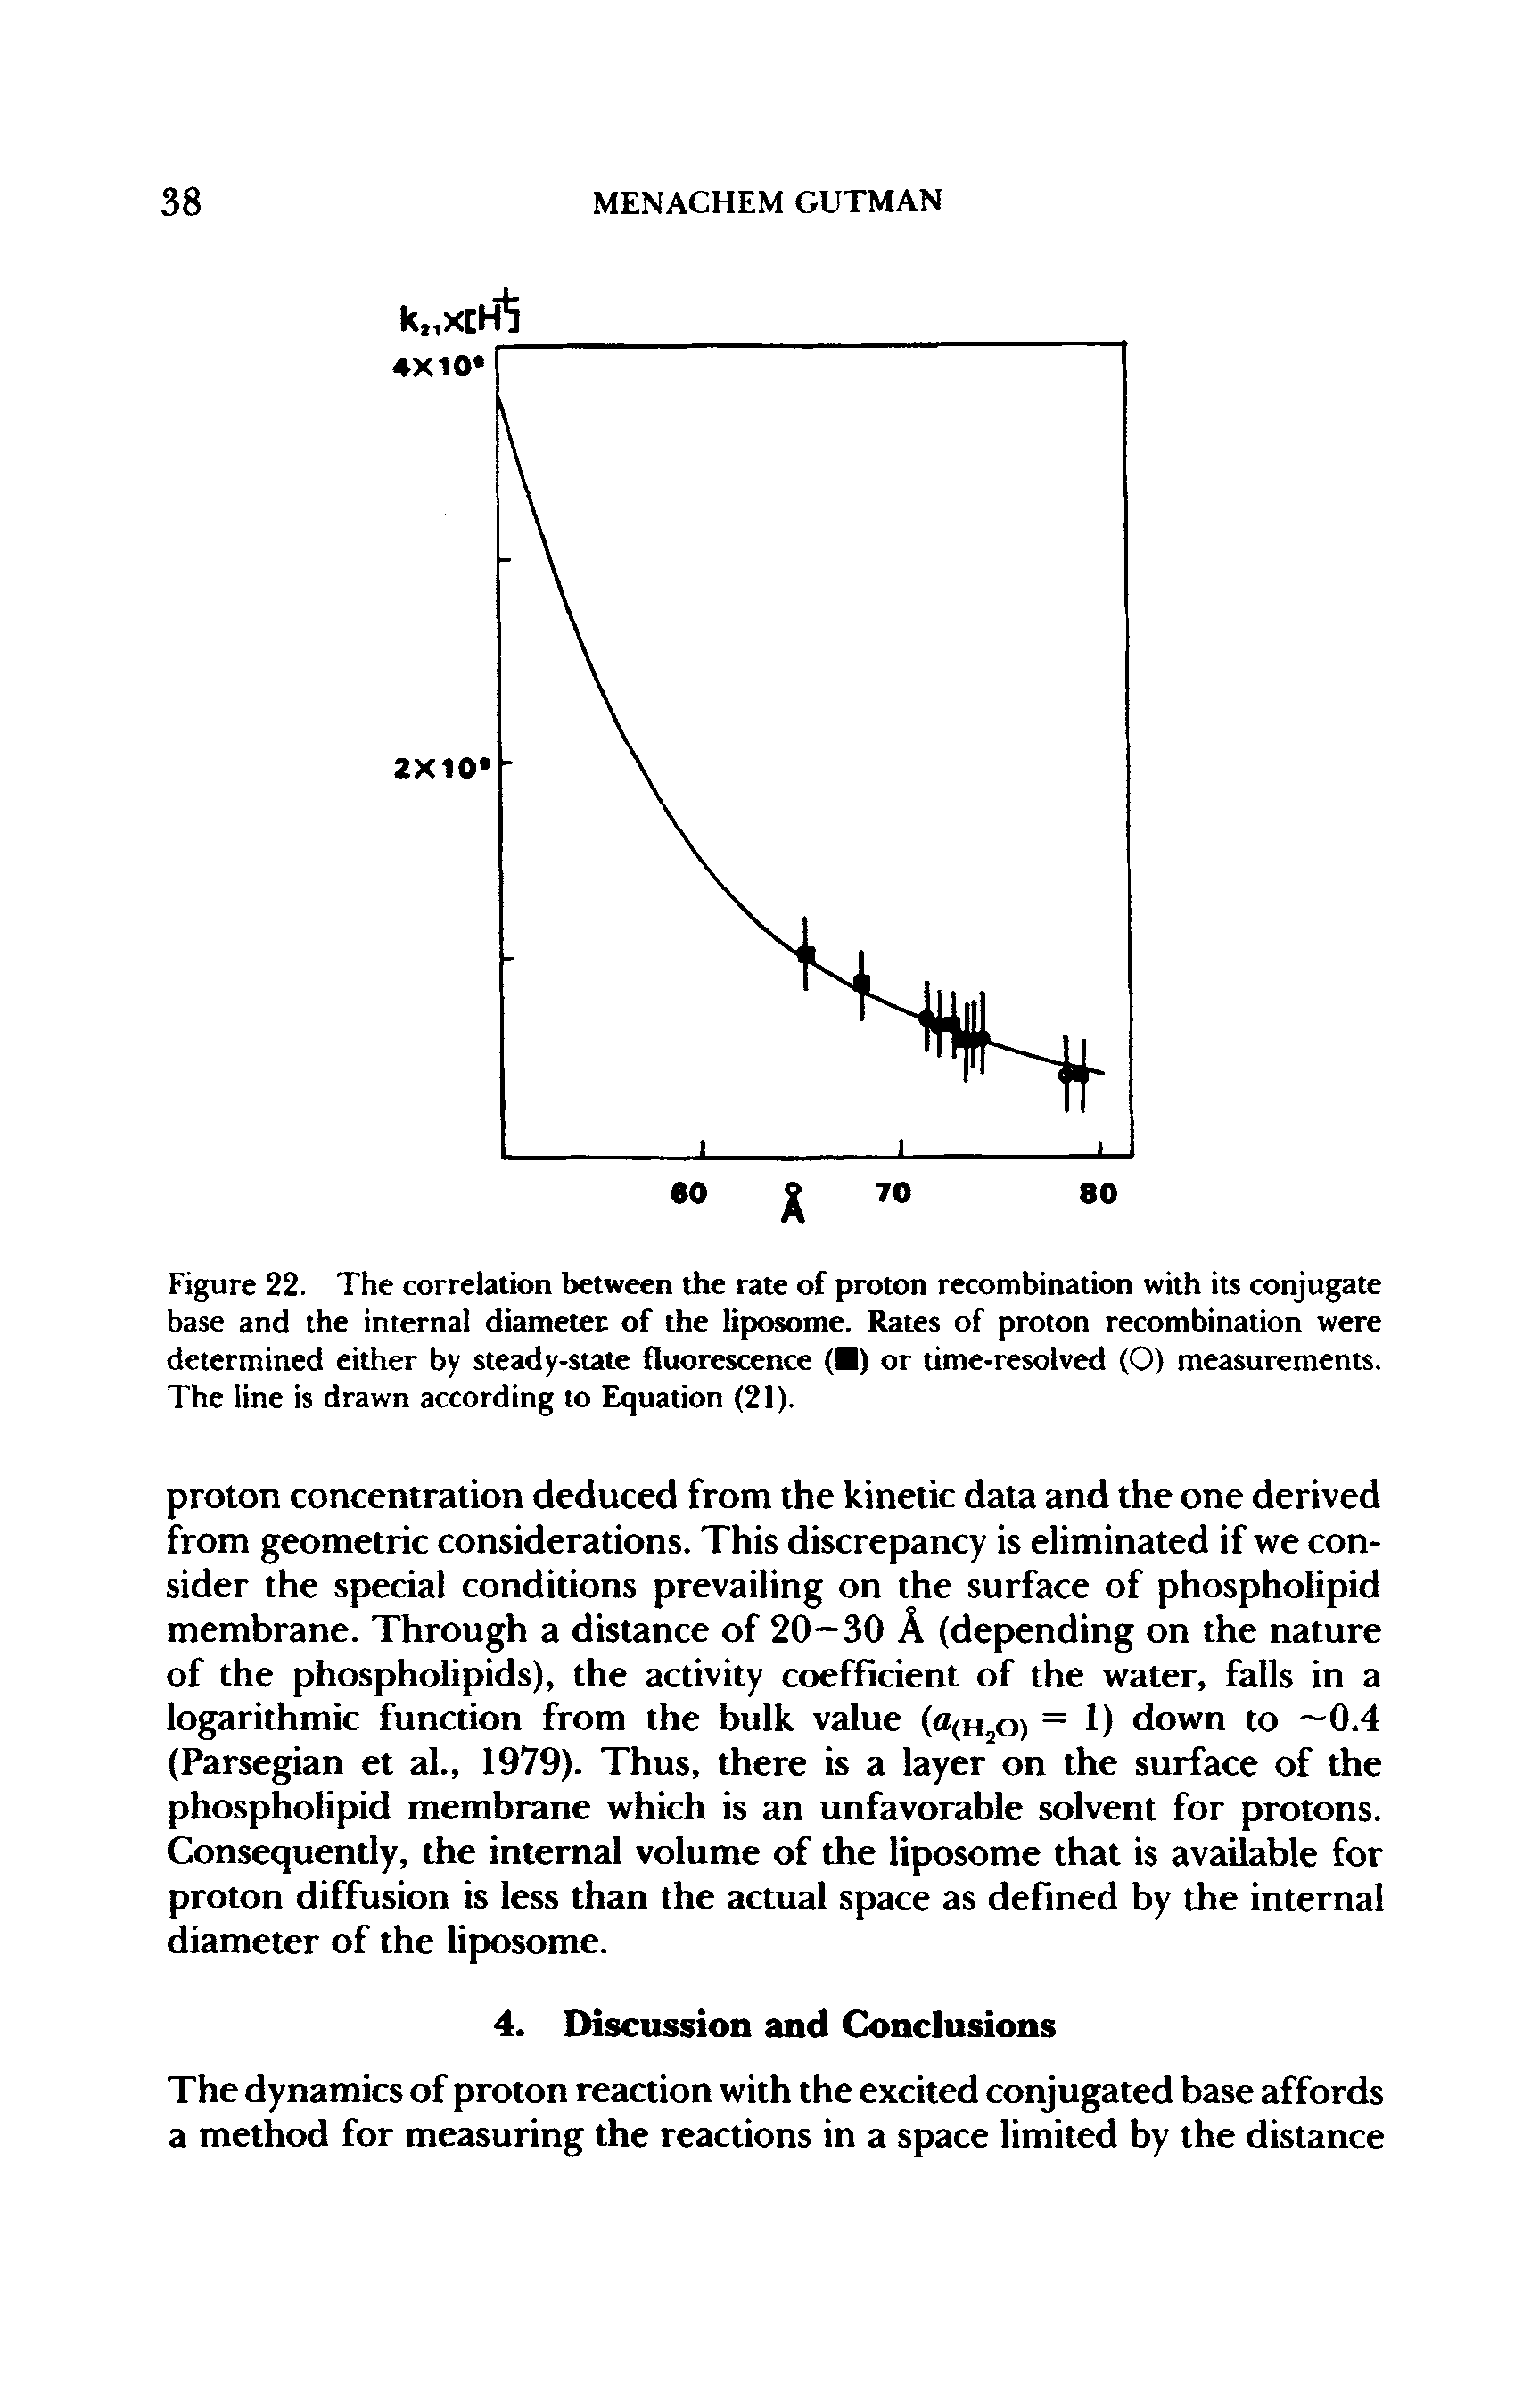 Figure 22. The correlation between the rate of proton recombination with its conjugate base and the internal diameter of the liposome. Rates of proton recombination were determined either by steady-state fluorescence ( ) or time-resolved (O) measurements. The line is drawn according to Equation (21).